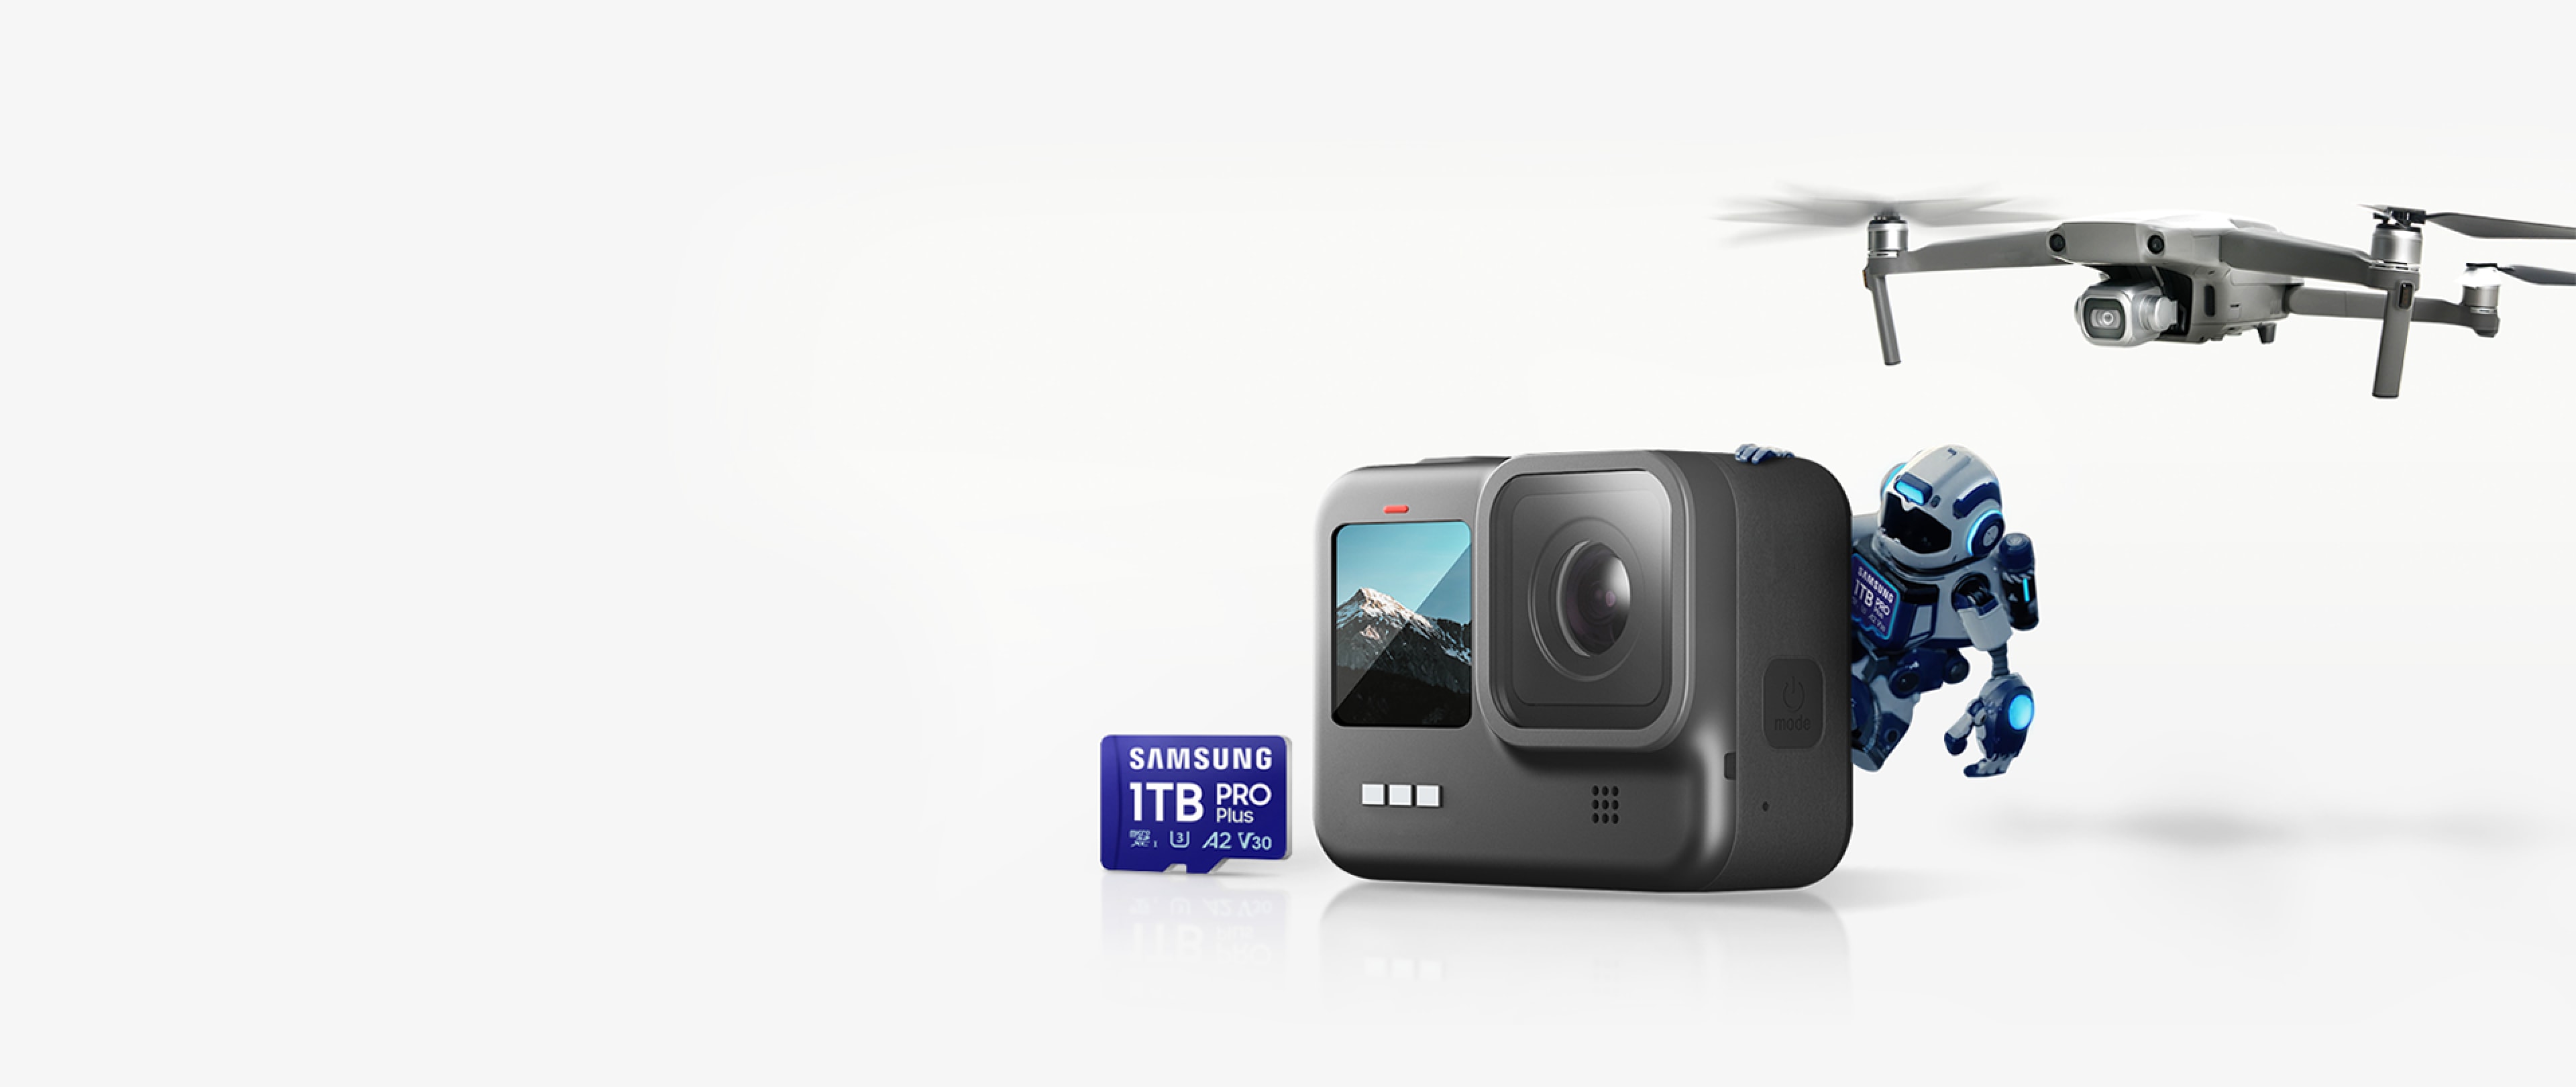 Robot characters, action cameras, and drones are seen along with Samsung PRO Plus.